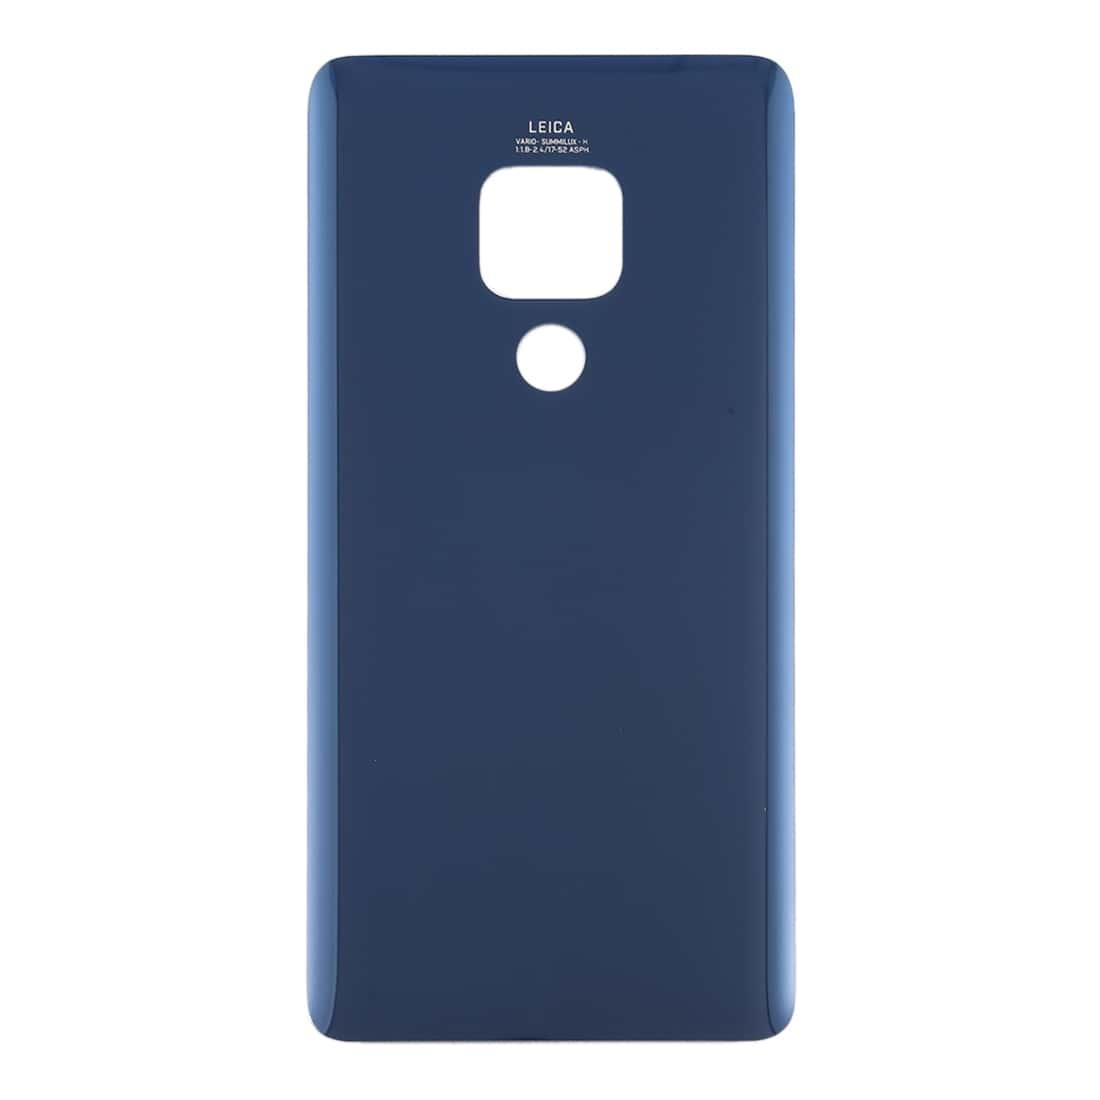 Back Panel Housing Body for Huawei Mate 20 Blue